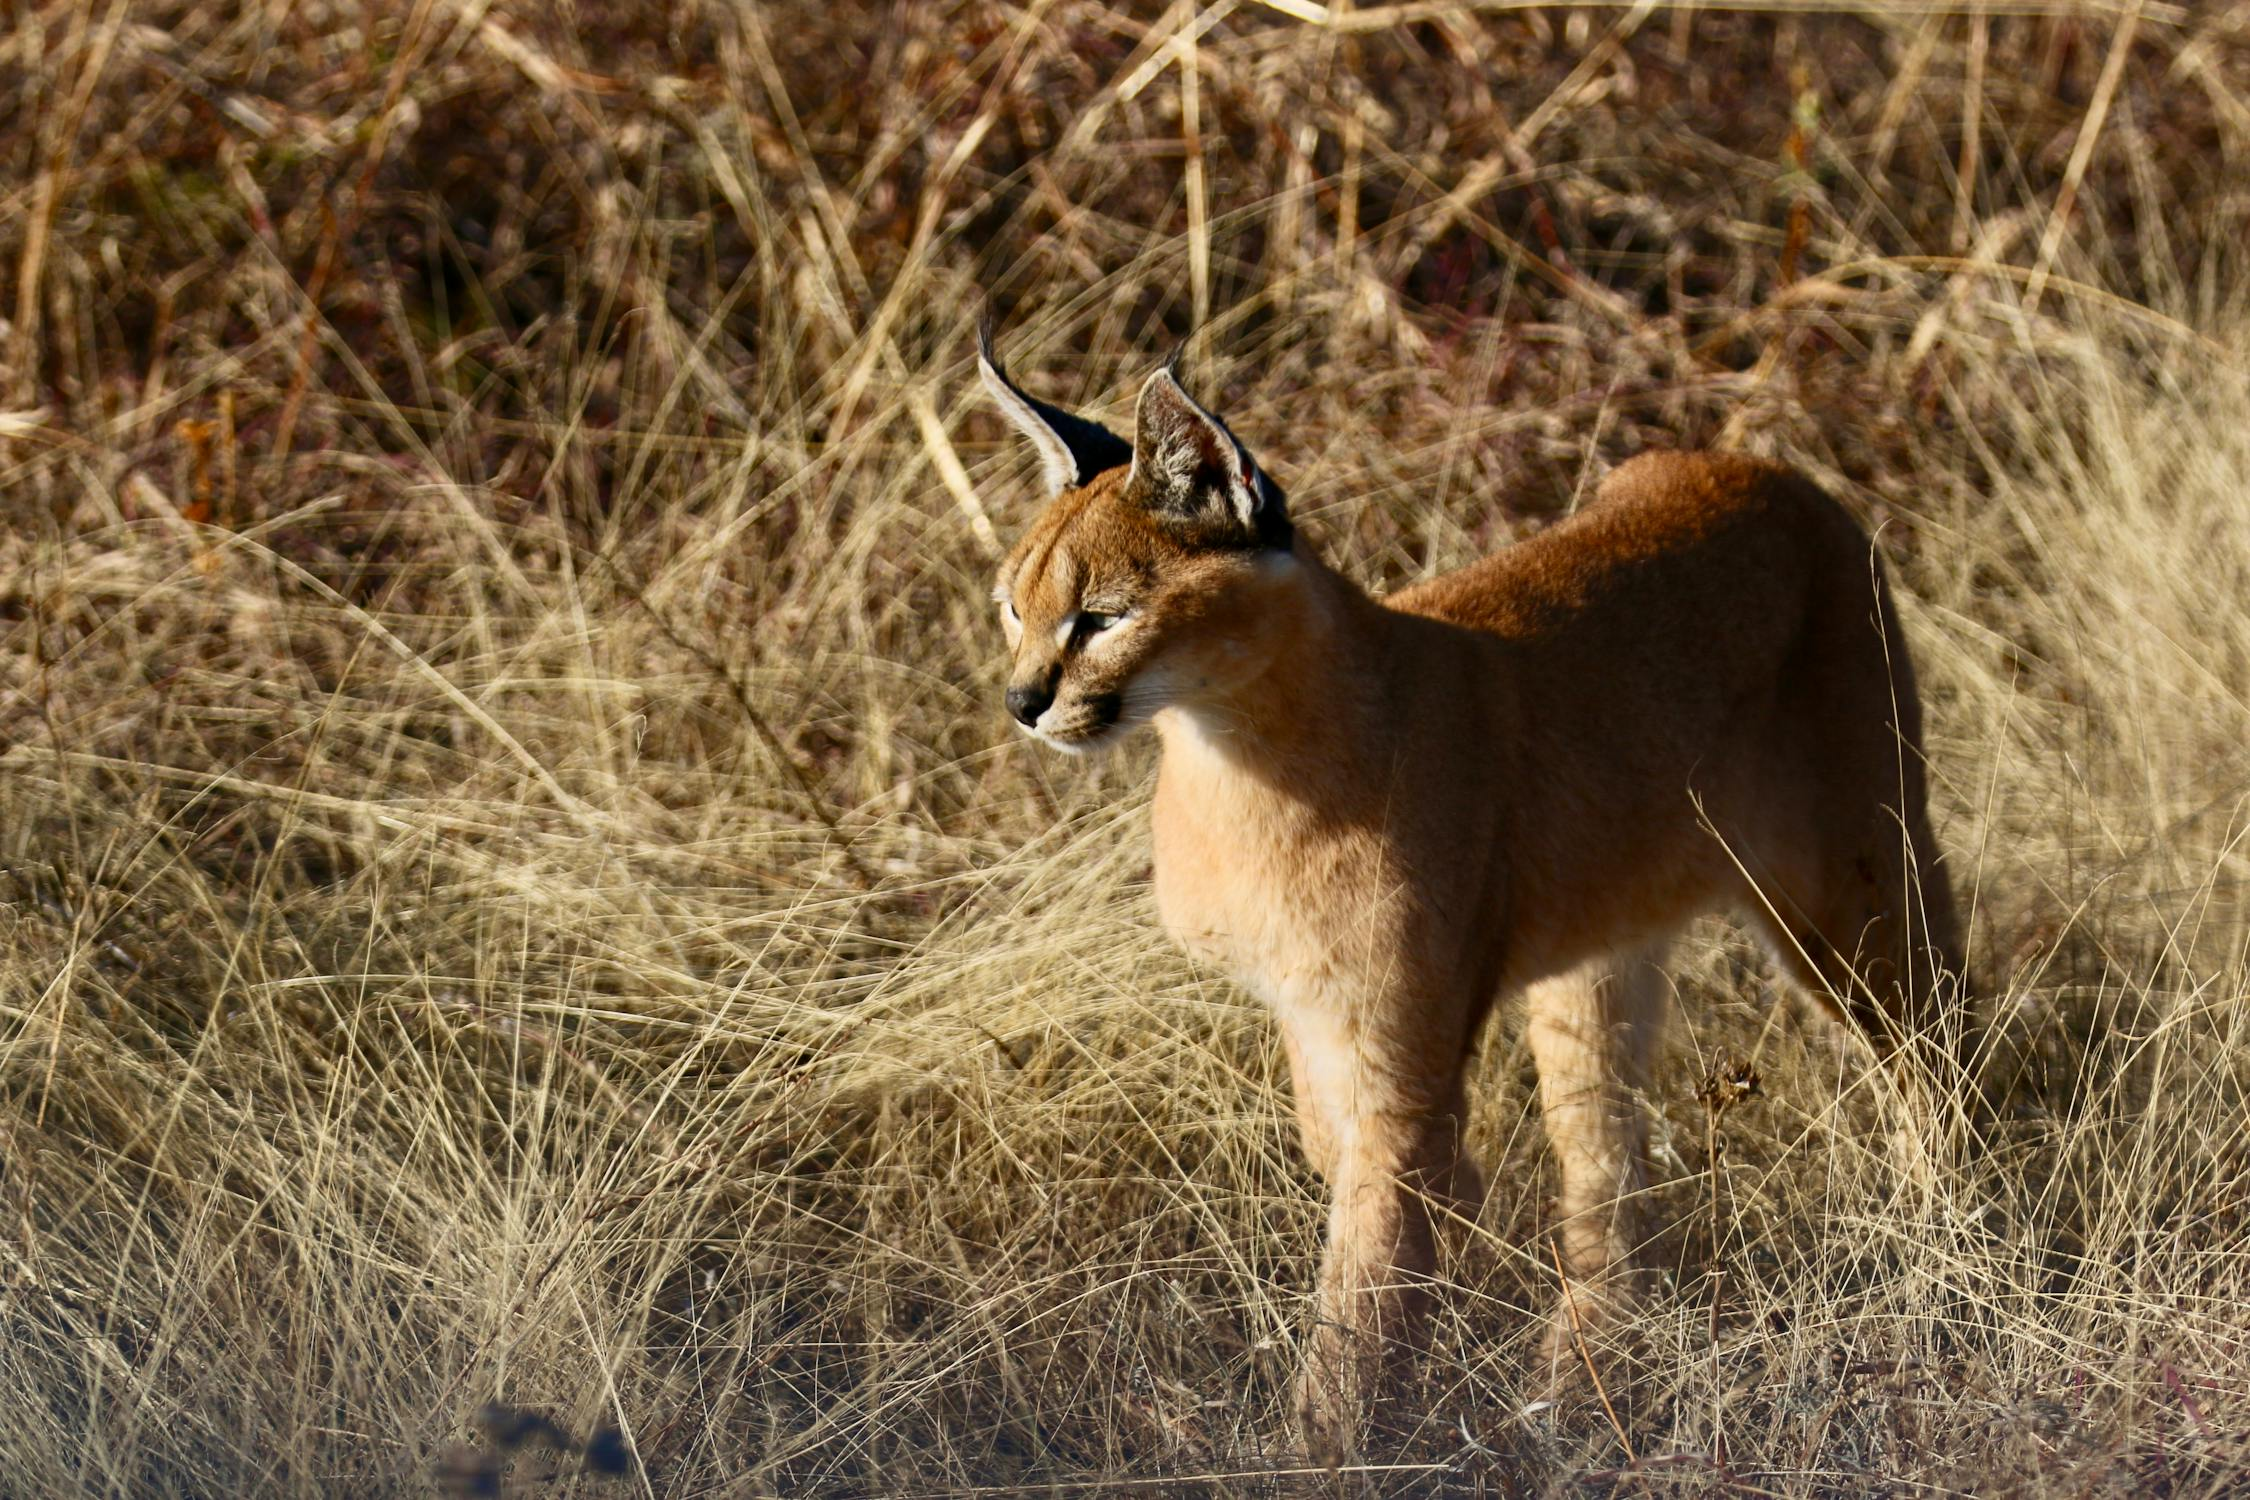 https://www.pexels.com/photo/caracal-standing-on-a-field-2278164/